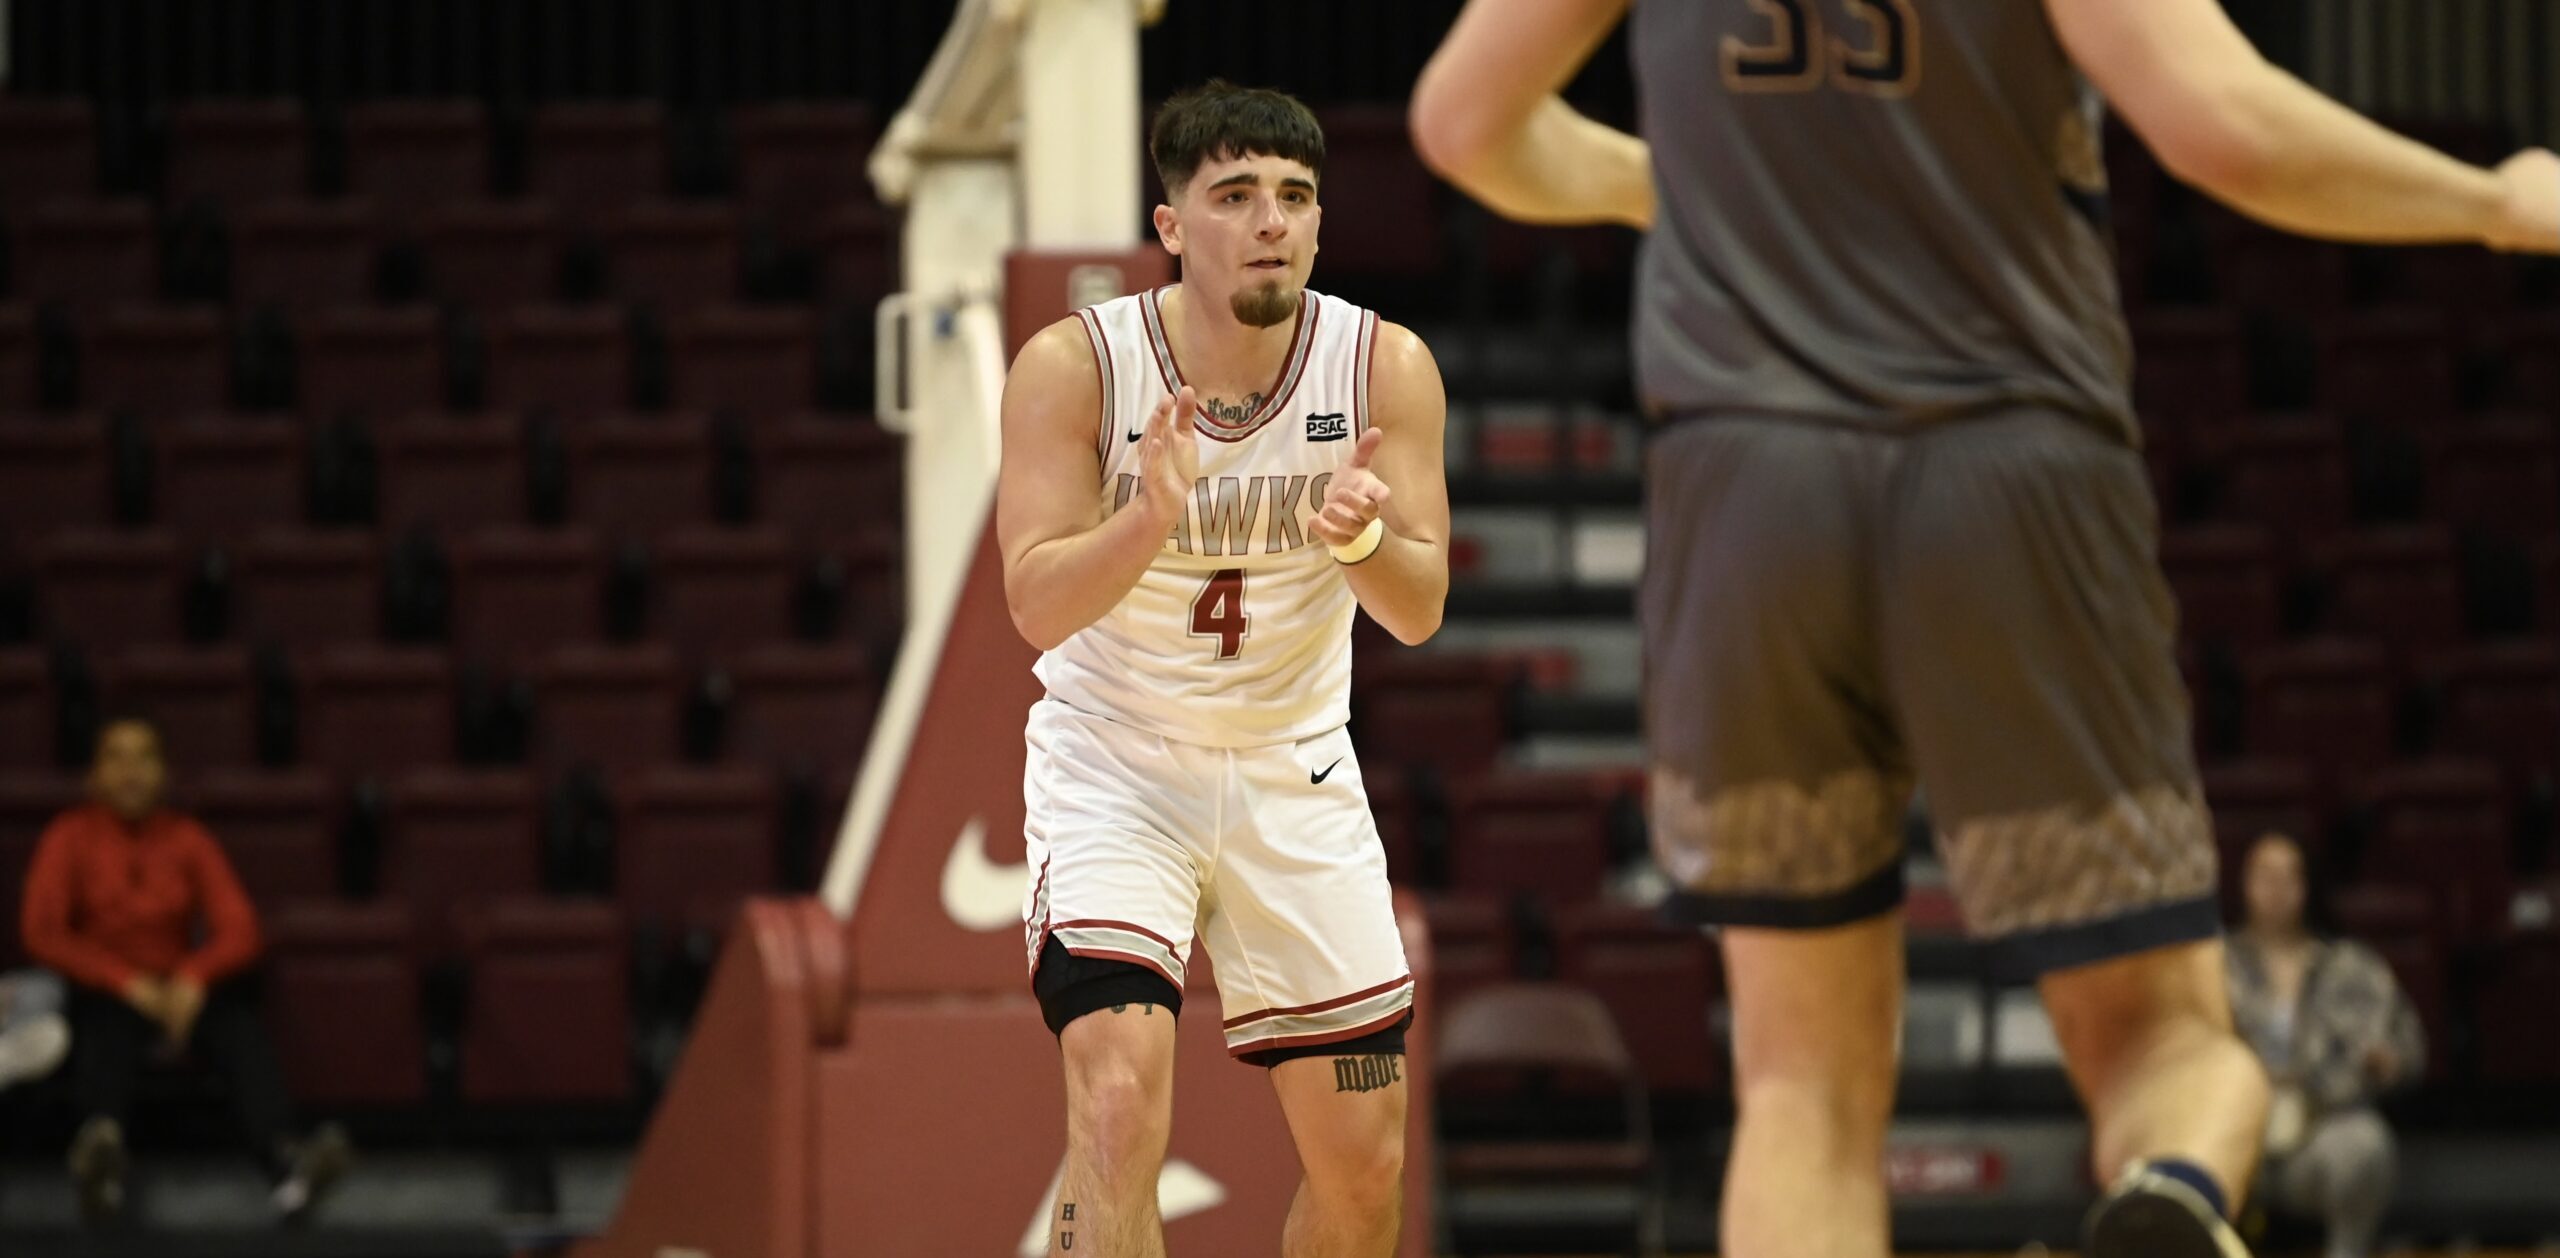 In The Press: Bryce Radford living a dream back at IUP